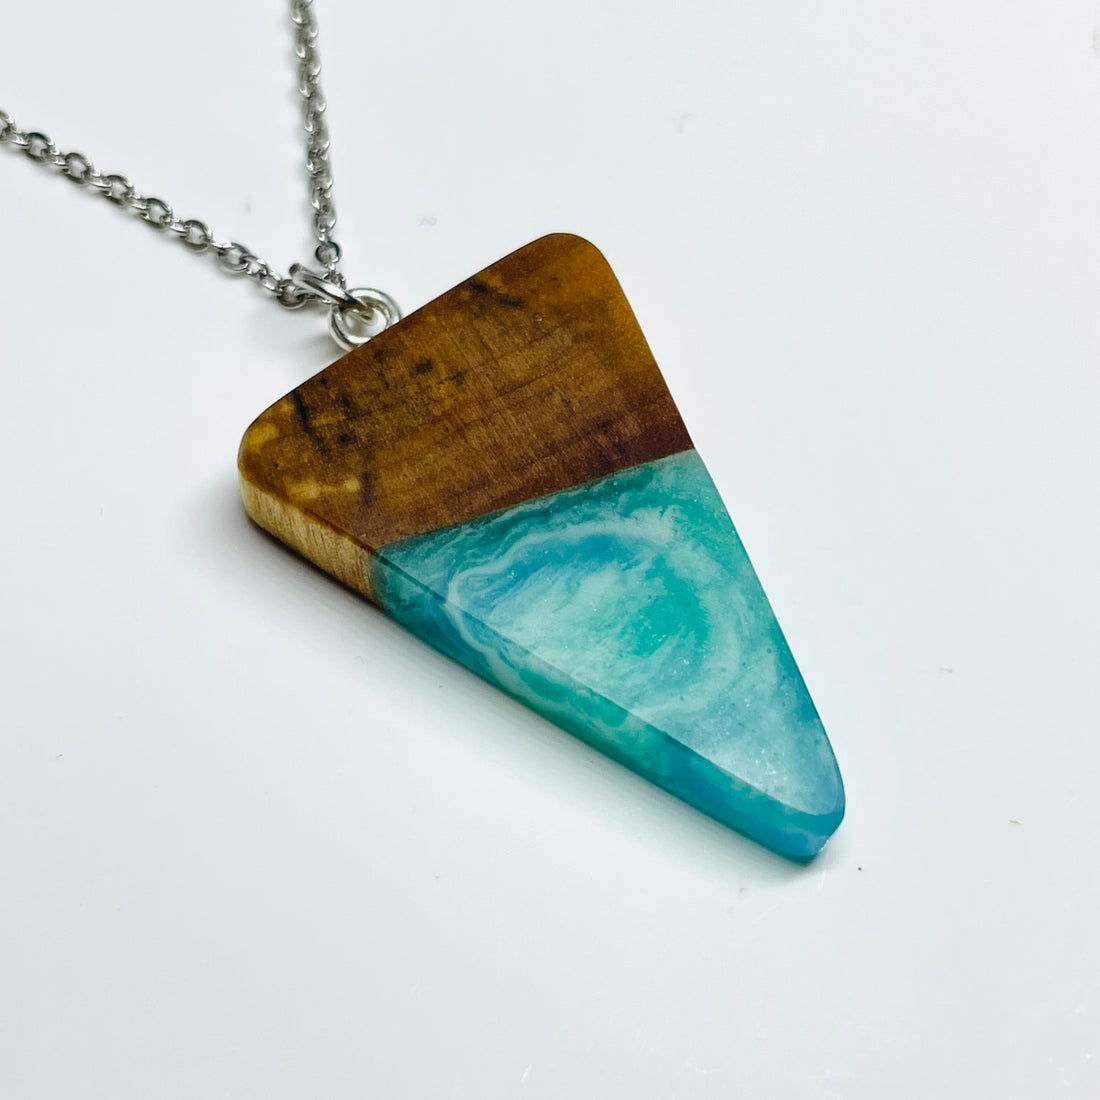 handmade jewelry, Minnesota local wood and resin artist. handmade spalted maple wood and resin pendant necklace, 9" stainless steel chain, ocean waves blue, green and white resin.